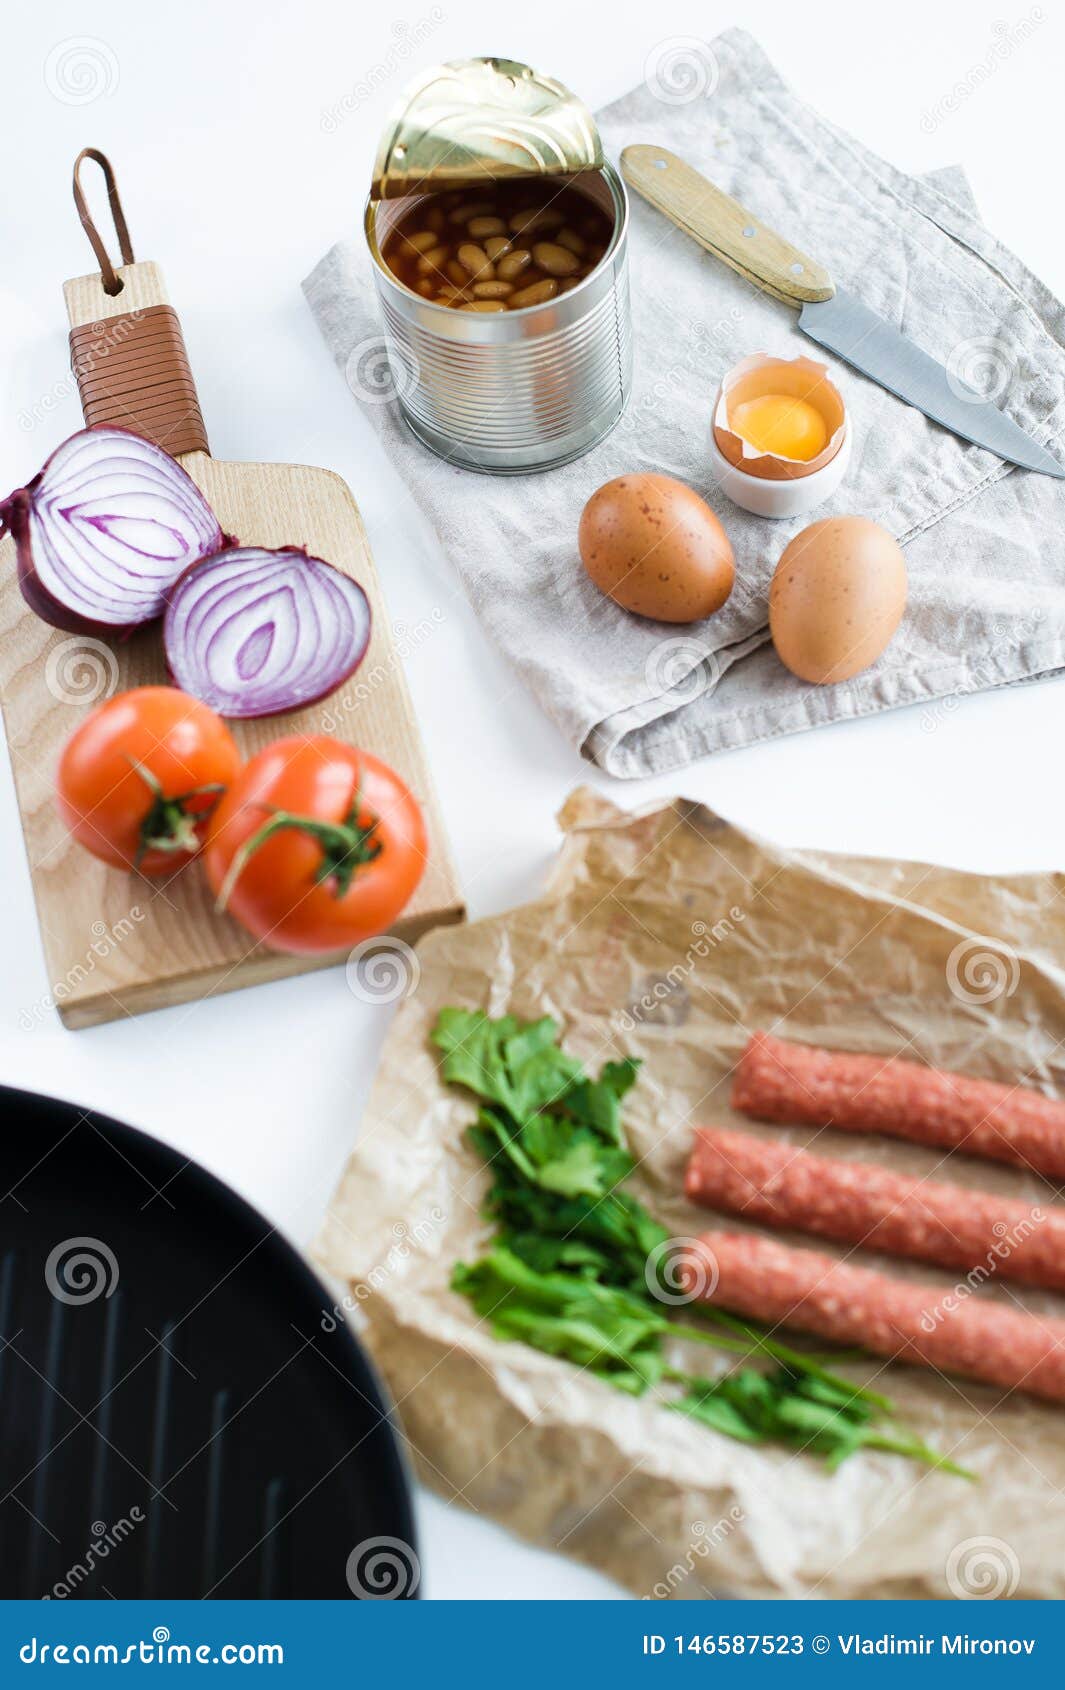 Ingredients For A Healthy Organic Breakfast  Stock Image 